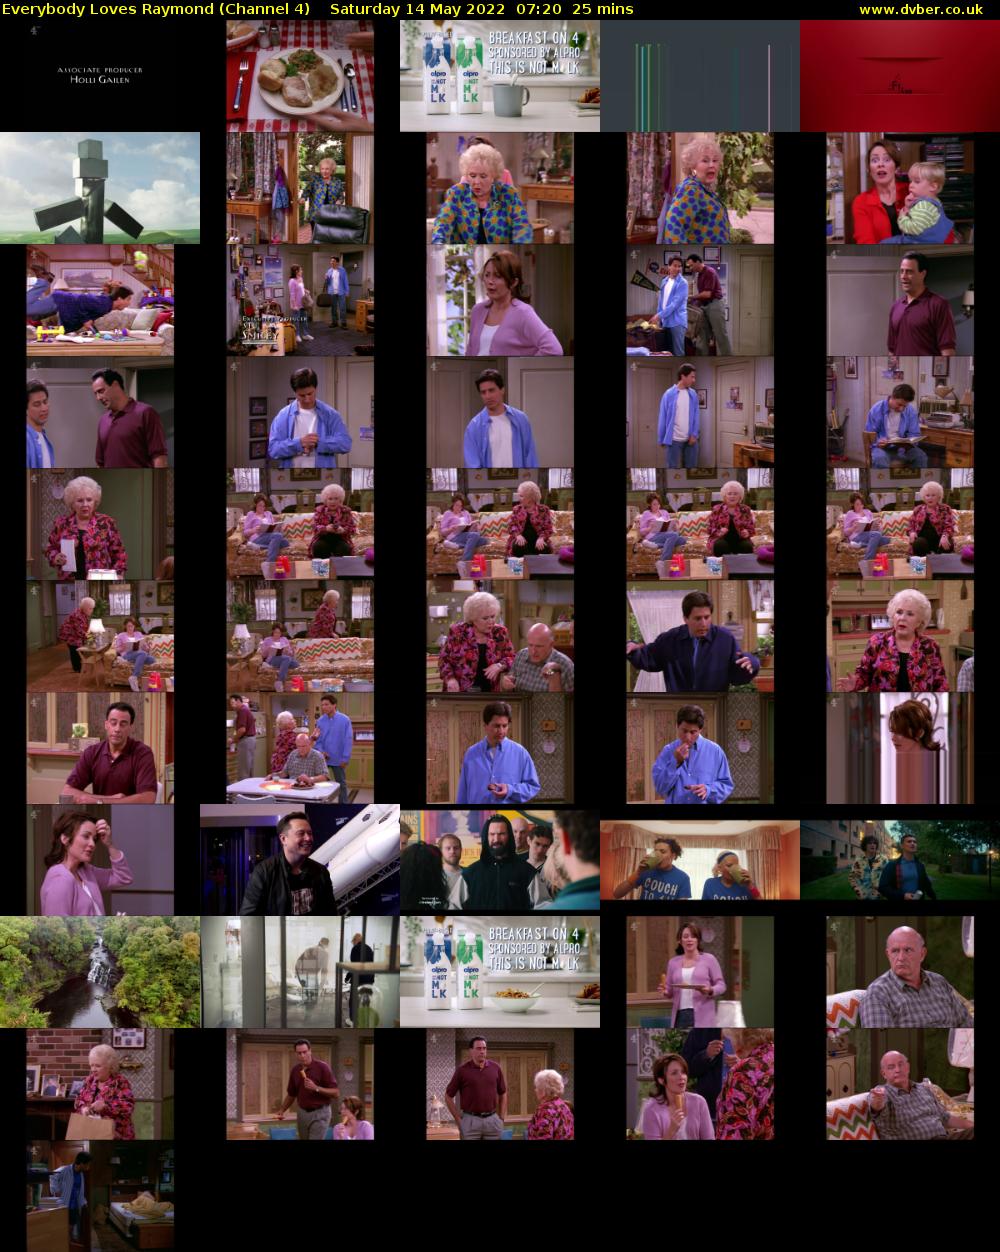 Everybody Loves Raymond (Channel 4) Saturday 14 May 2022 07:20 - 07:45